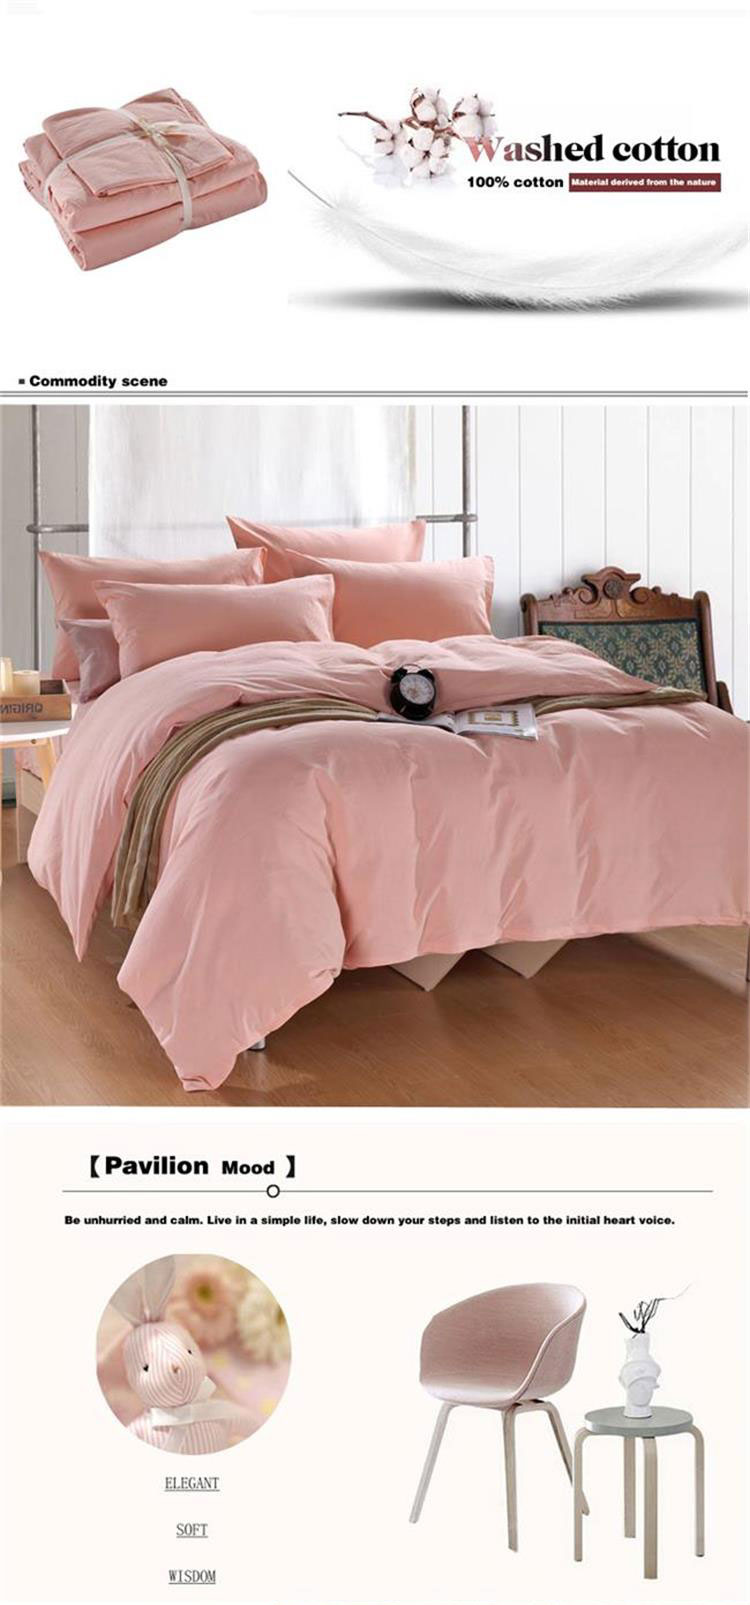 Bedding Sets Queen Size Bed